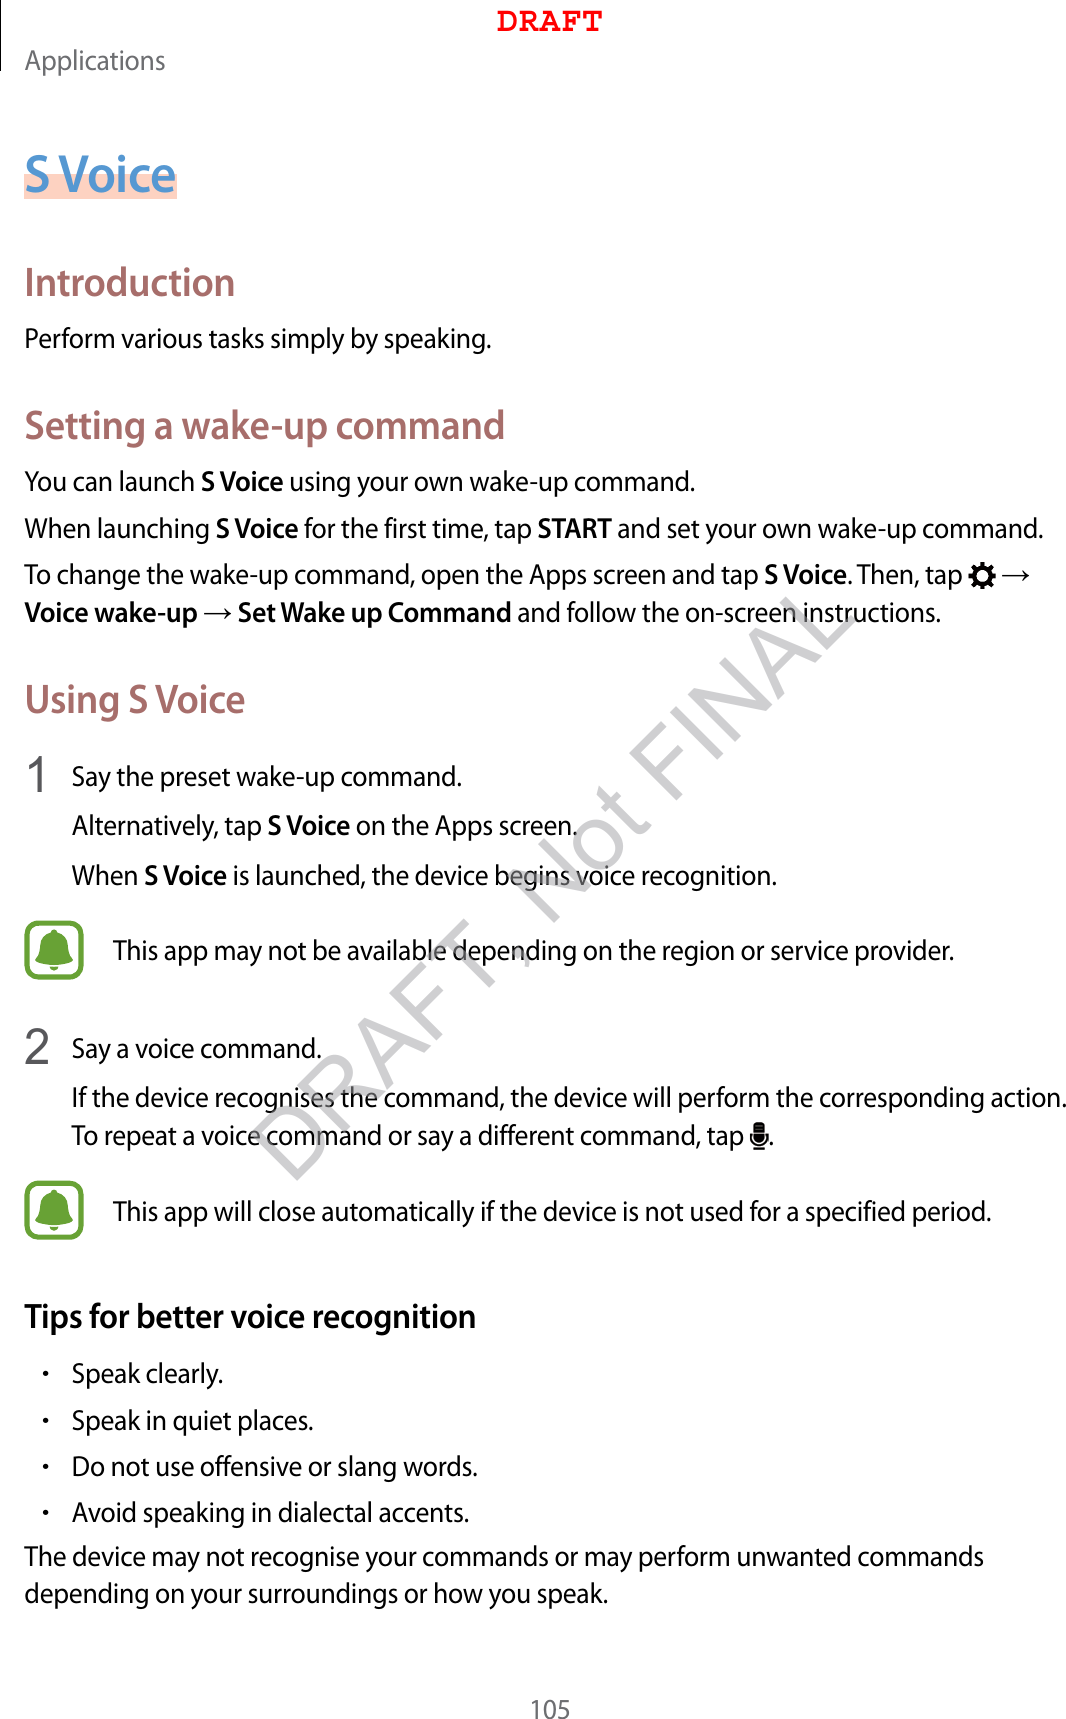 Applications105S VoiceIntroductionPerform various tasks simply by speaking.Setting a wake-up commandYou can launch S Voice using your own wake-up command.When launching S Voice for the first time, tap START and set your own wake-up command.To change the wake-up command, open the Apps screen and tap S Voice. Then, tap    Voice wake-up  Set Wake up Command and follow the on-screen instructions.Using S Voice1  Say the preset wake-up command.Alternatively, tap S Voice on the Apps screen.When S Voice is launched, the device begins voice recognition.This app may not be available depending on the region or service provider.2  Say a voice command.If the device recognises the command, the device will perform the corresponding action. To repeat a voice command or say a different command, tap  .This app will close automatically if the device is not used for a specified period.Tips for better voice recognition•Speak clearly.•Speak in quiet places.•Do not use offensive or slang words.•Avoid speaking in dialectal accents.The device may not recognise your commands or may perform unwanted commands depending on your surroundings or how you speak.DRAFTDRAFT, Not FINAL